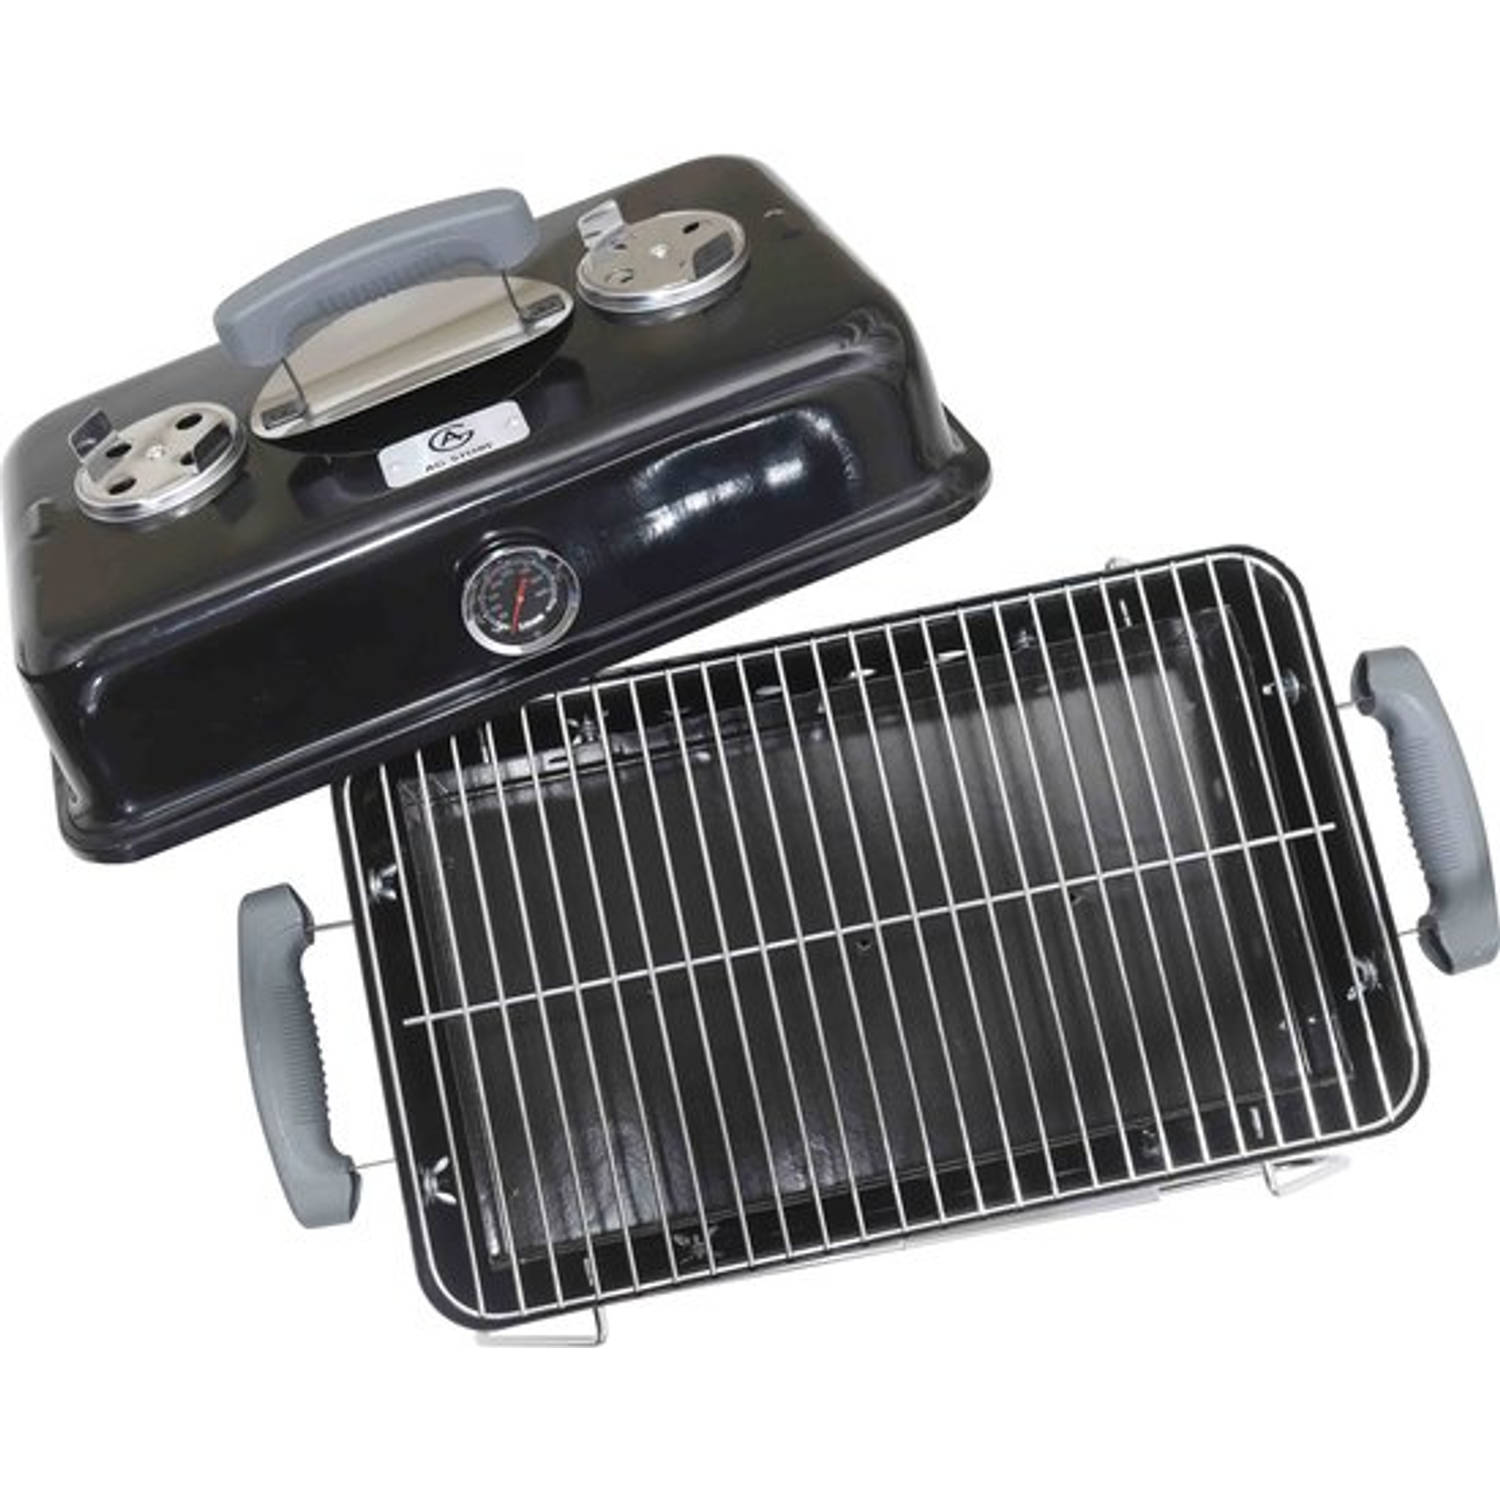 Ag To-go Barbecue Ø44 Cm Houtskoolbarbecues Incl. Thermometer Temperatuur Roestvrij Compact -Vierkan